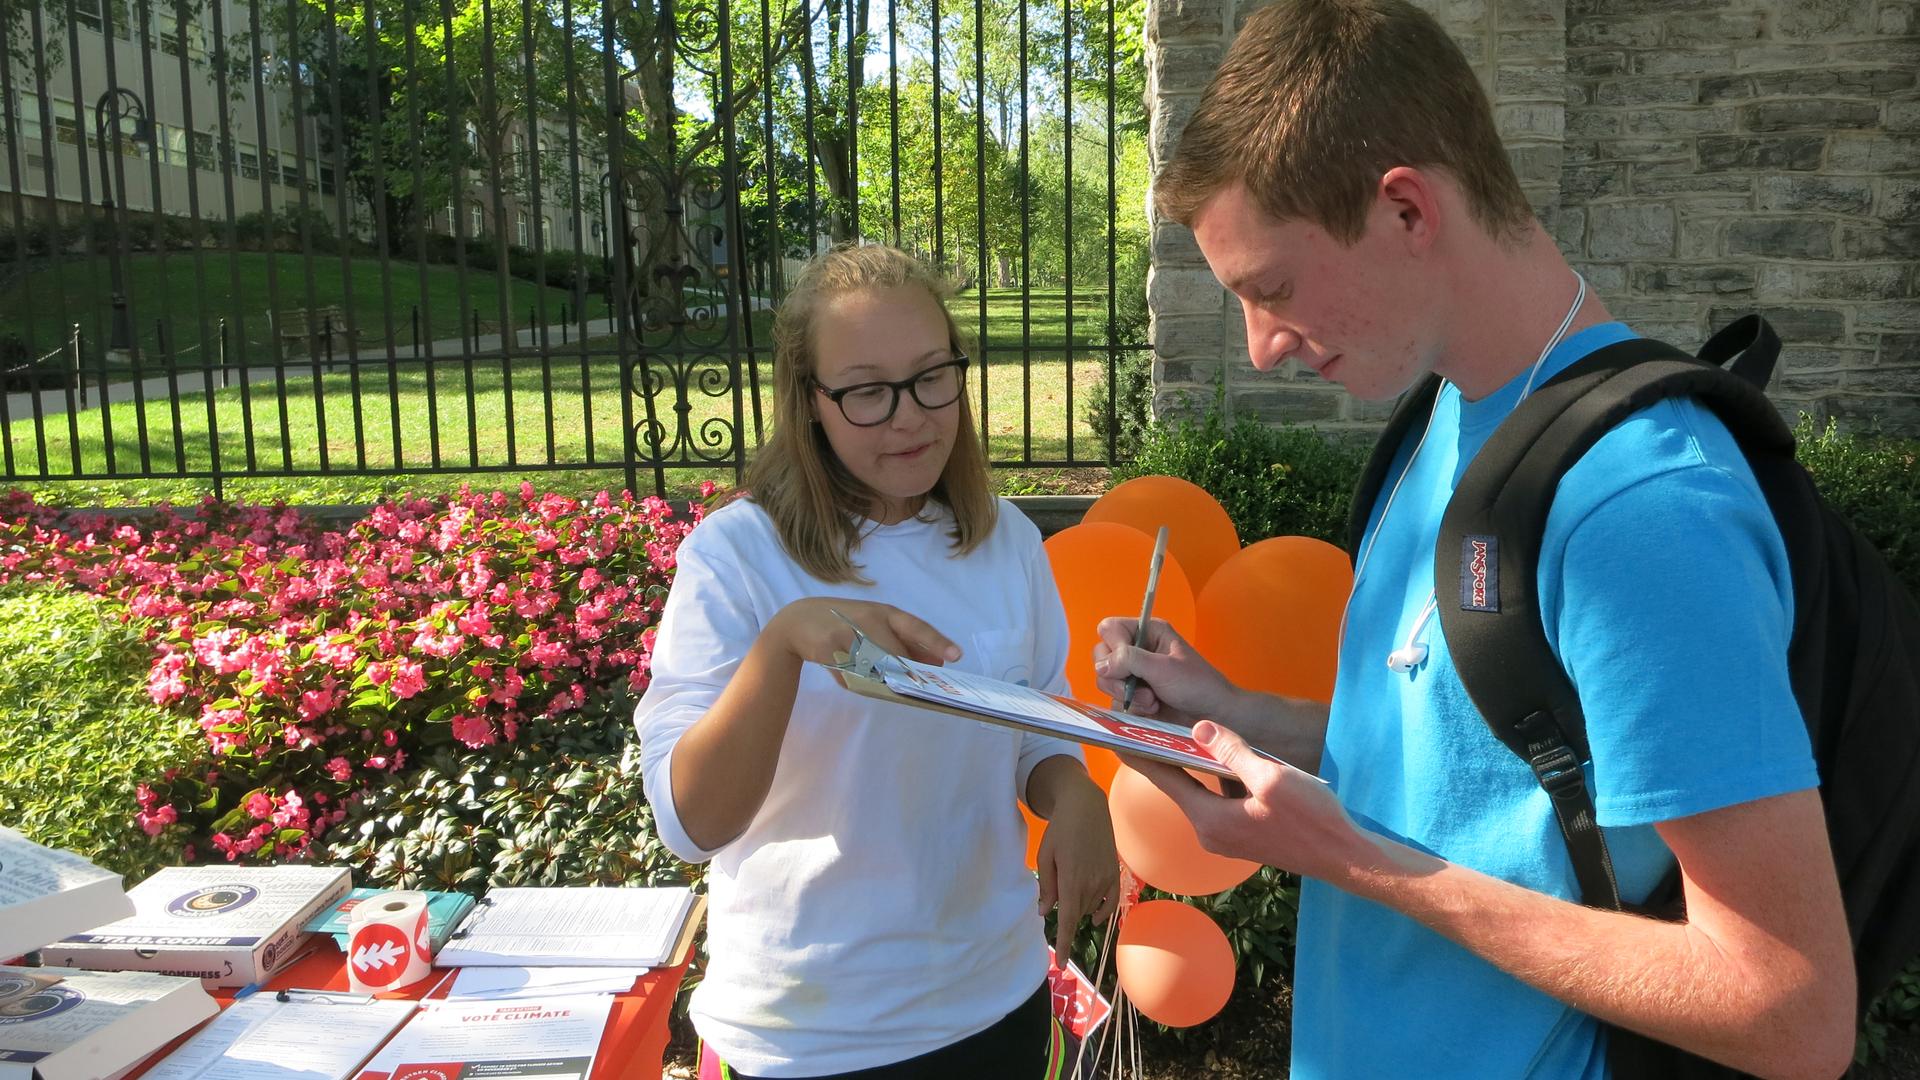 Penn State senior Makealy Meyers with NextGen Climate registers a potential voter just off campus and gets him to sign a commitment card to vote for a candidate who will tackle climate change. 